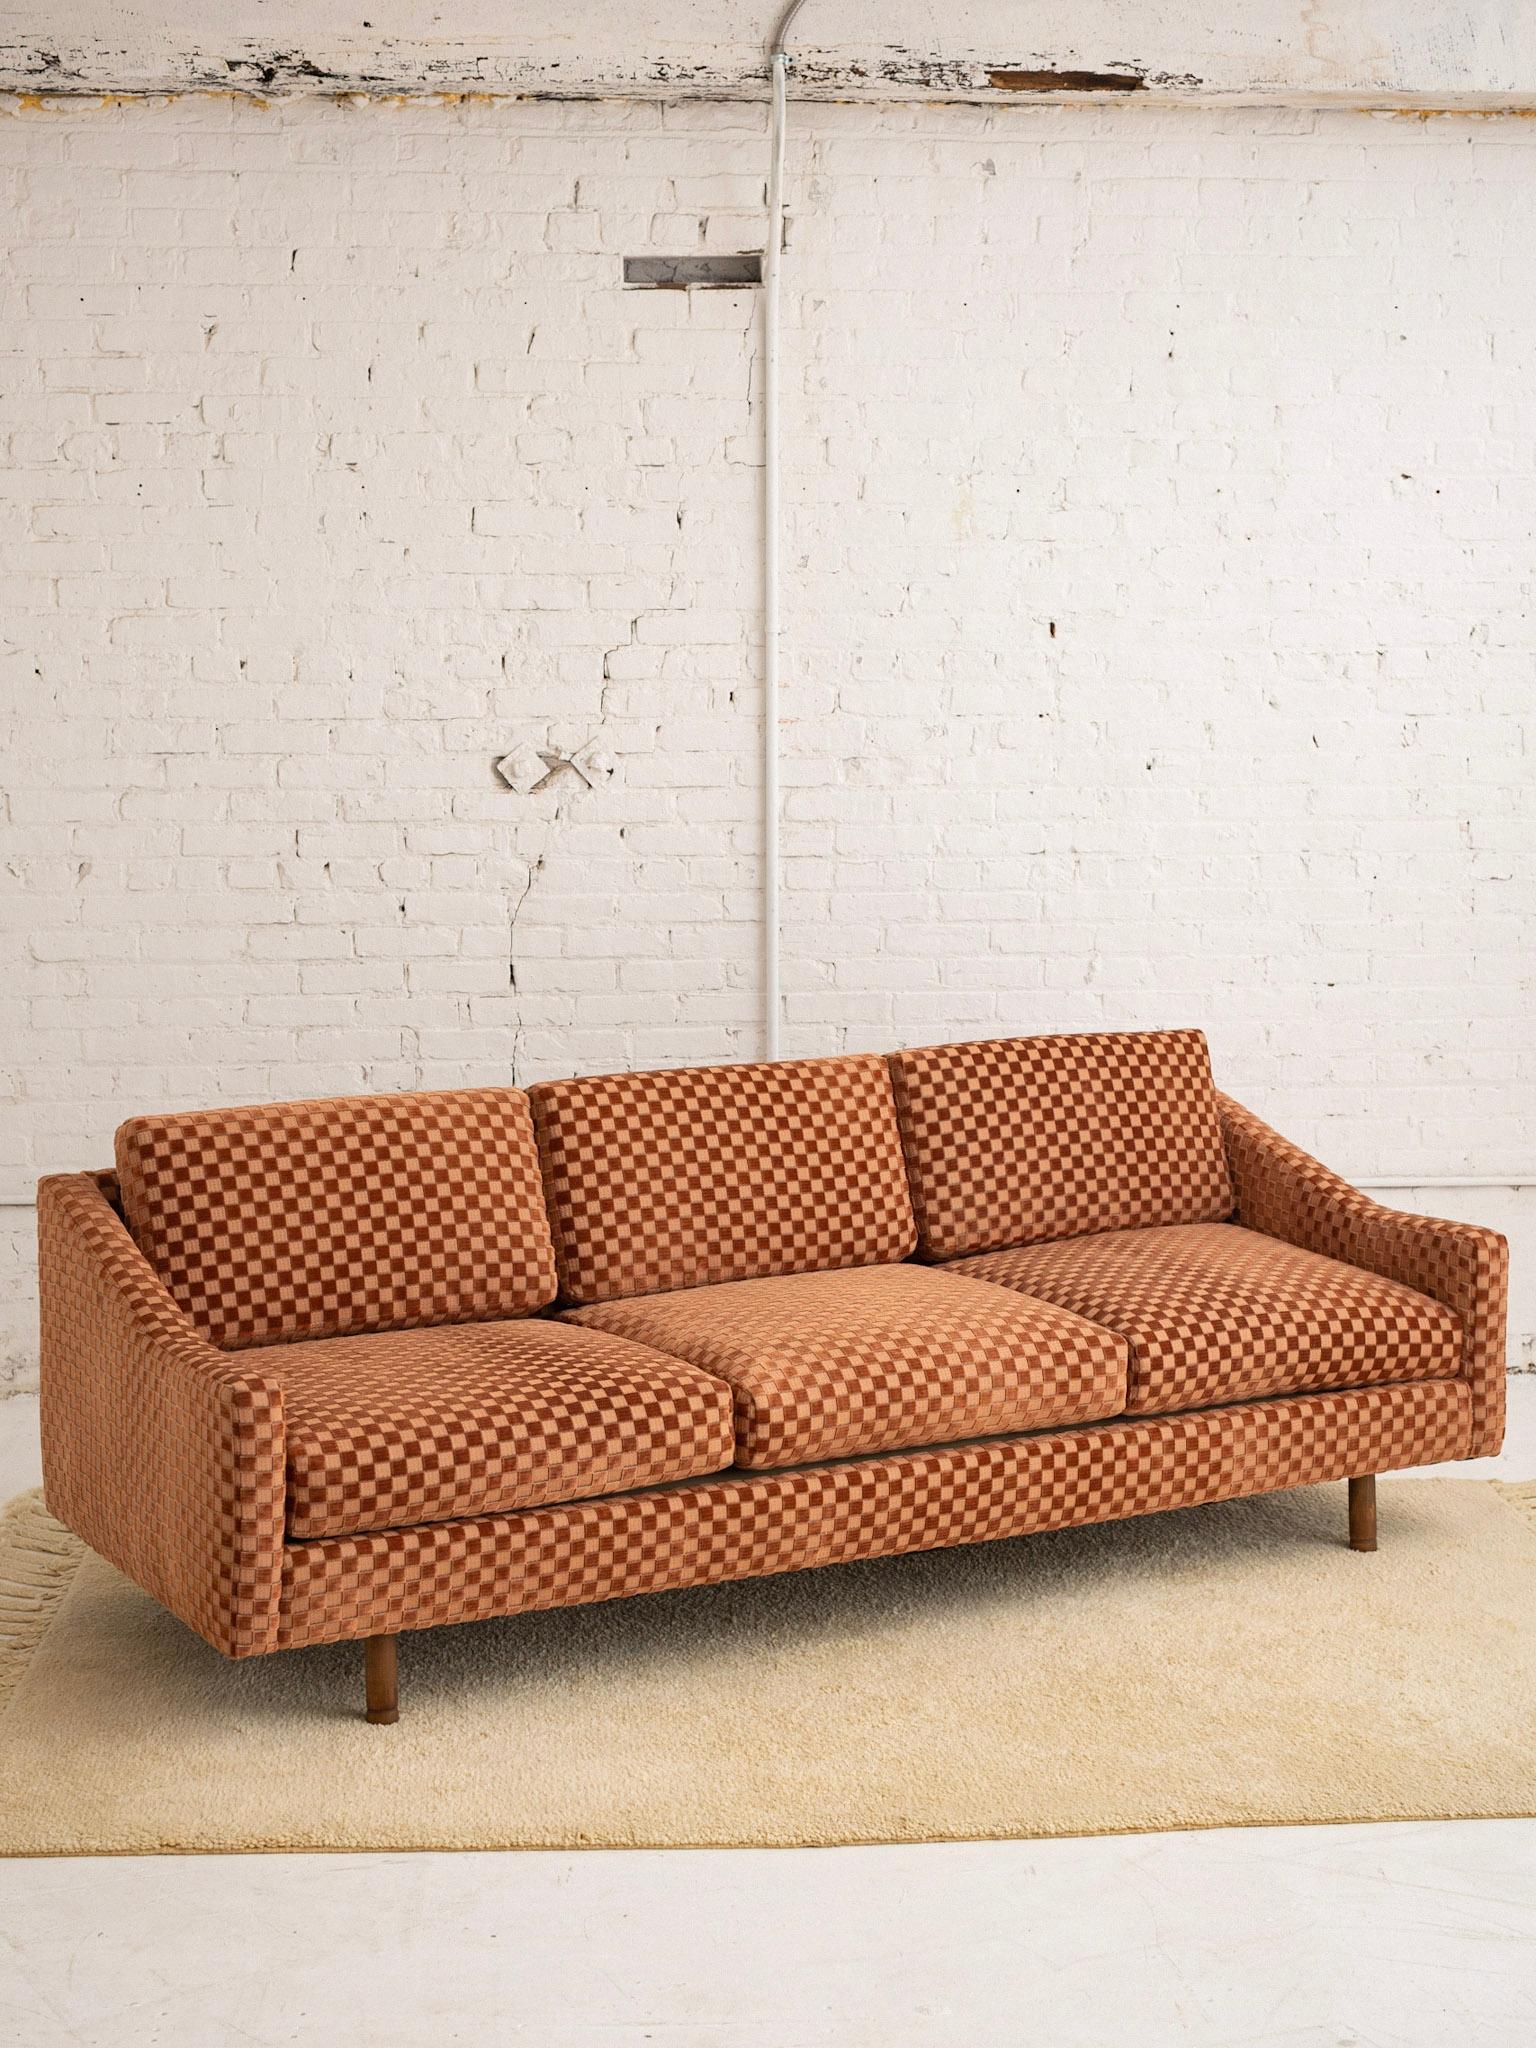 A mid century modern sofa by Selig. Classic streamlined silhouette. Newly upholstered in a checkered velvet. Fabric appears a soft burgundy color but reveals threads of olive green upon close inspection. New foam cushions.